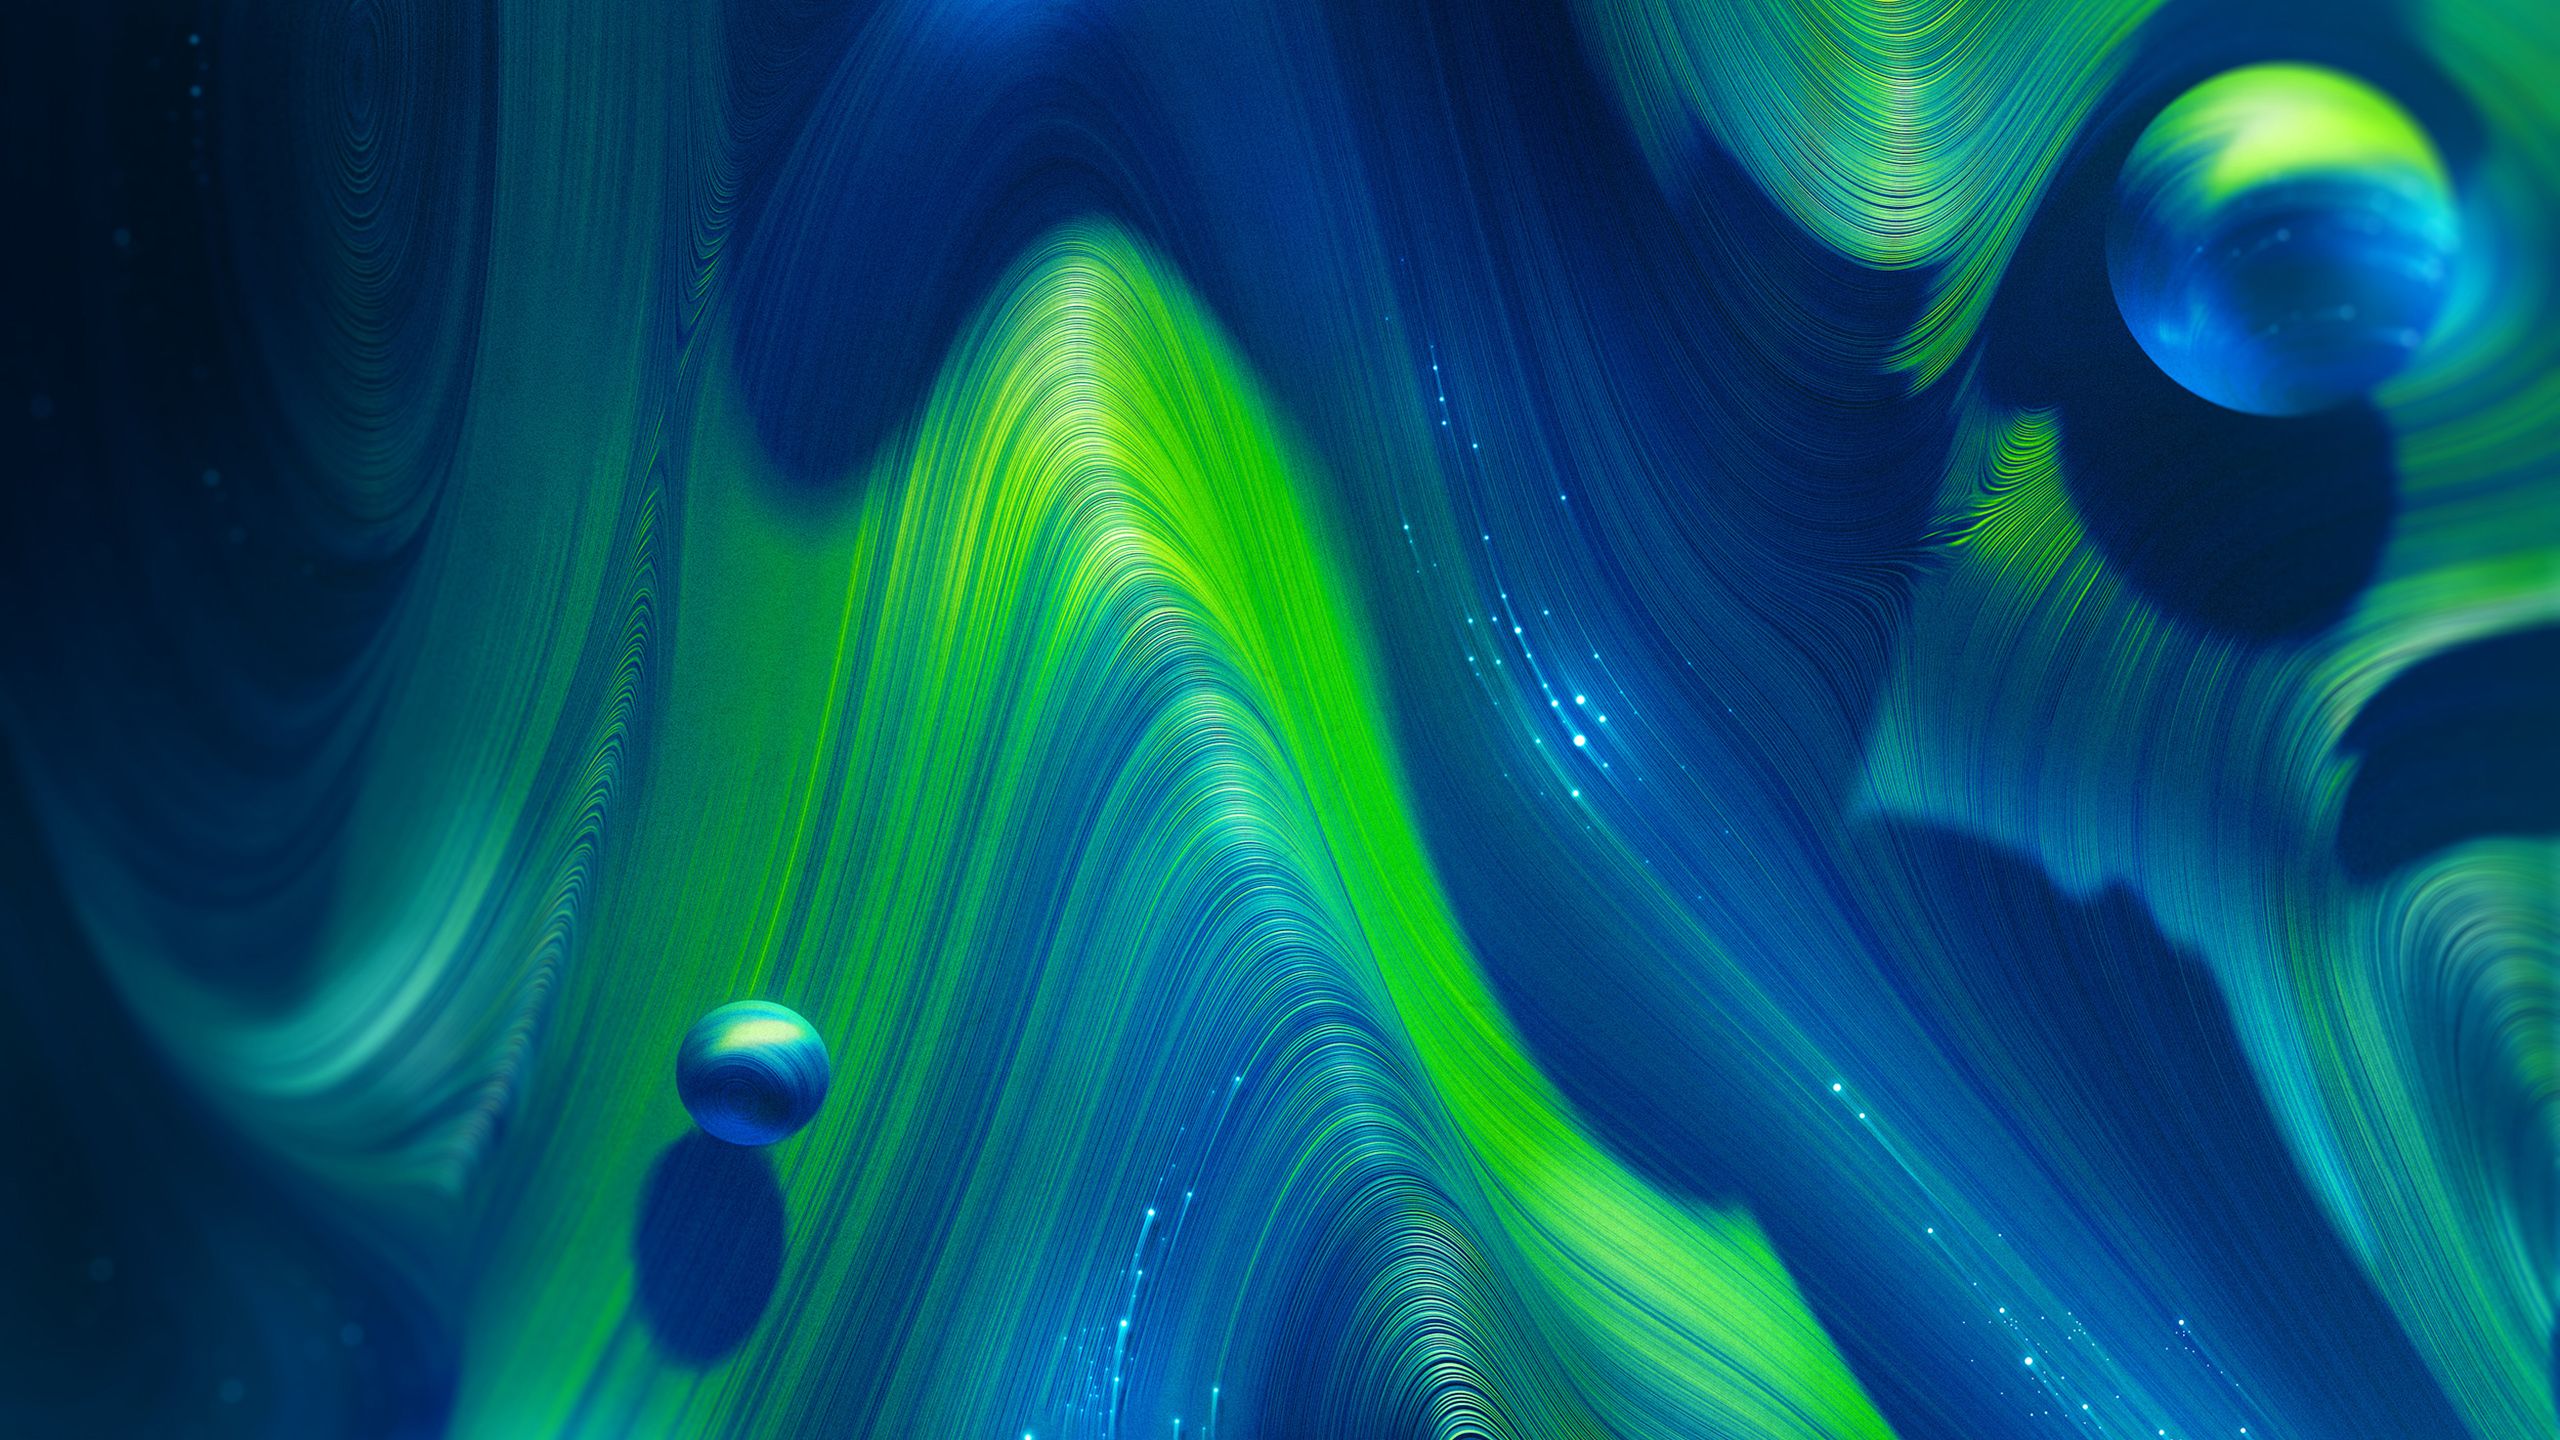 Abstract Green Wallpapers